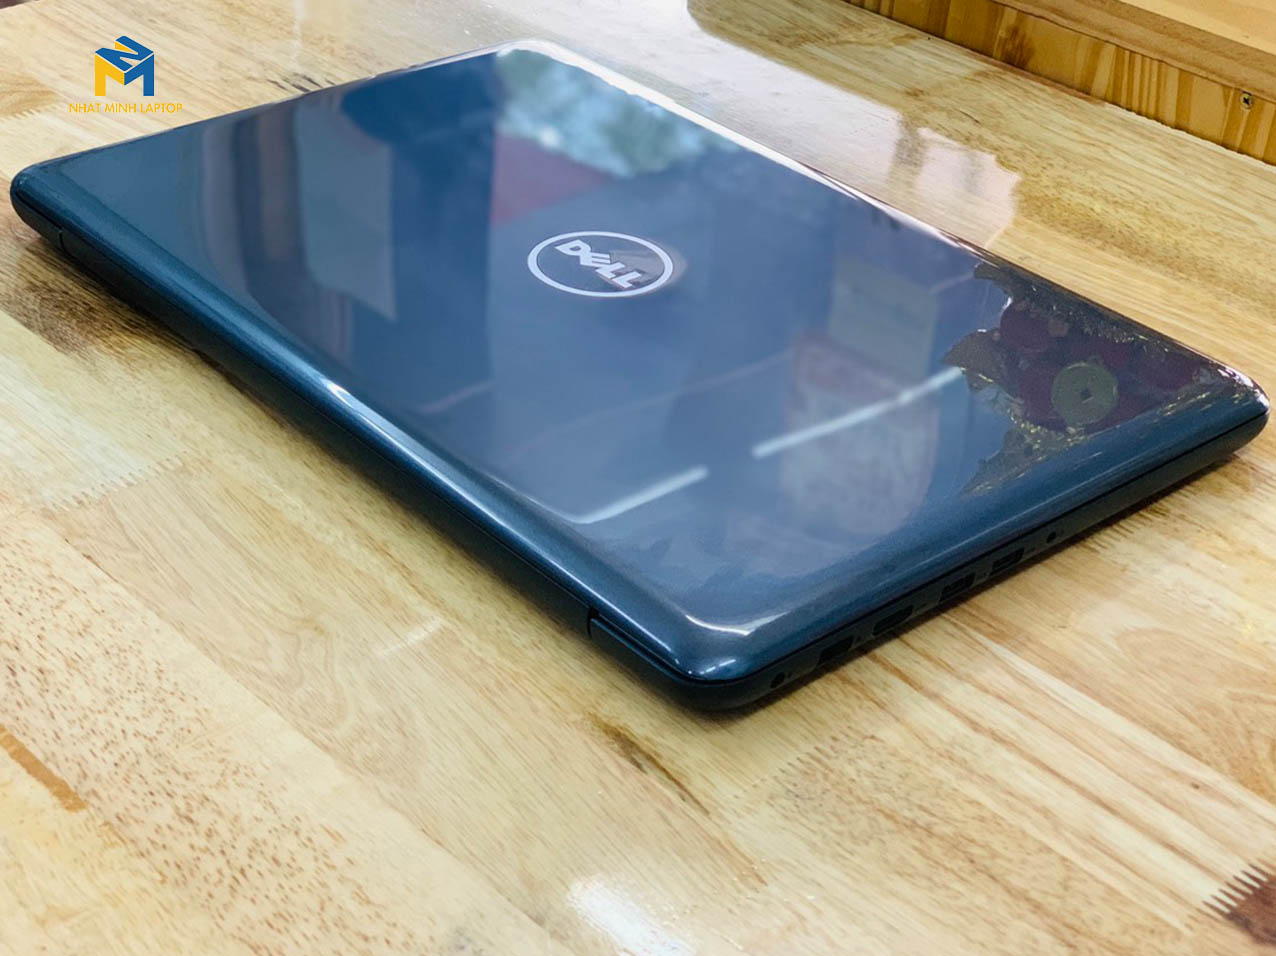 dell inspiron 5567 i7 review